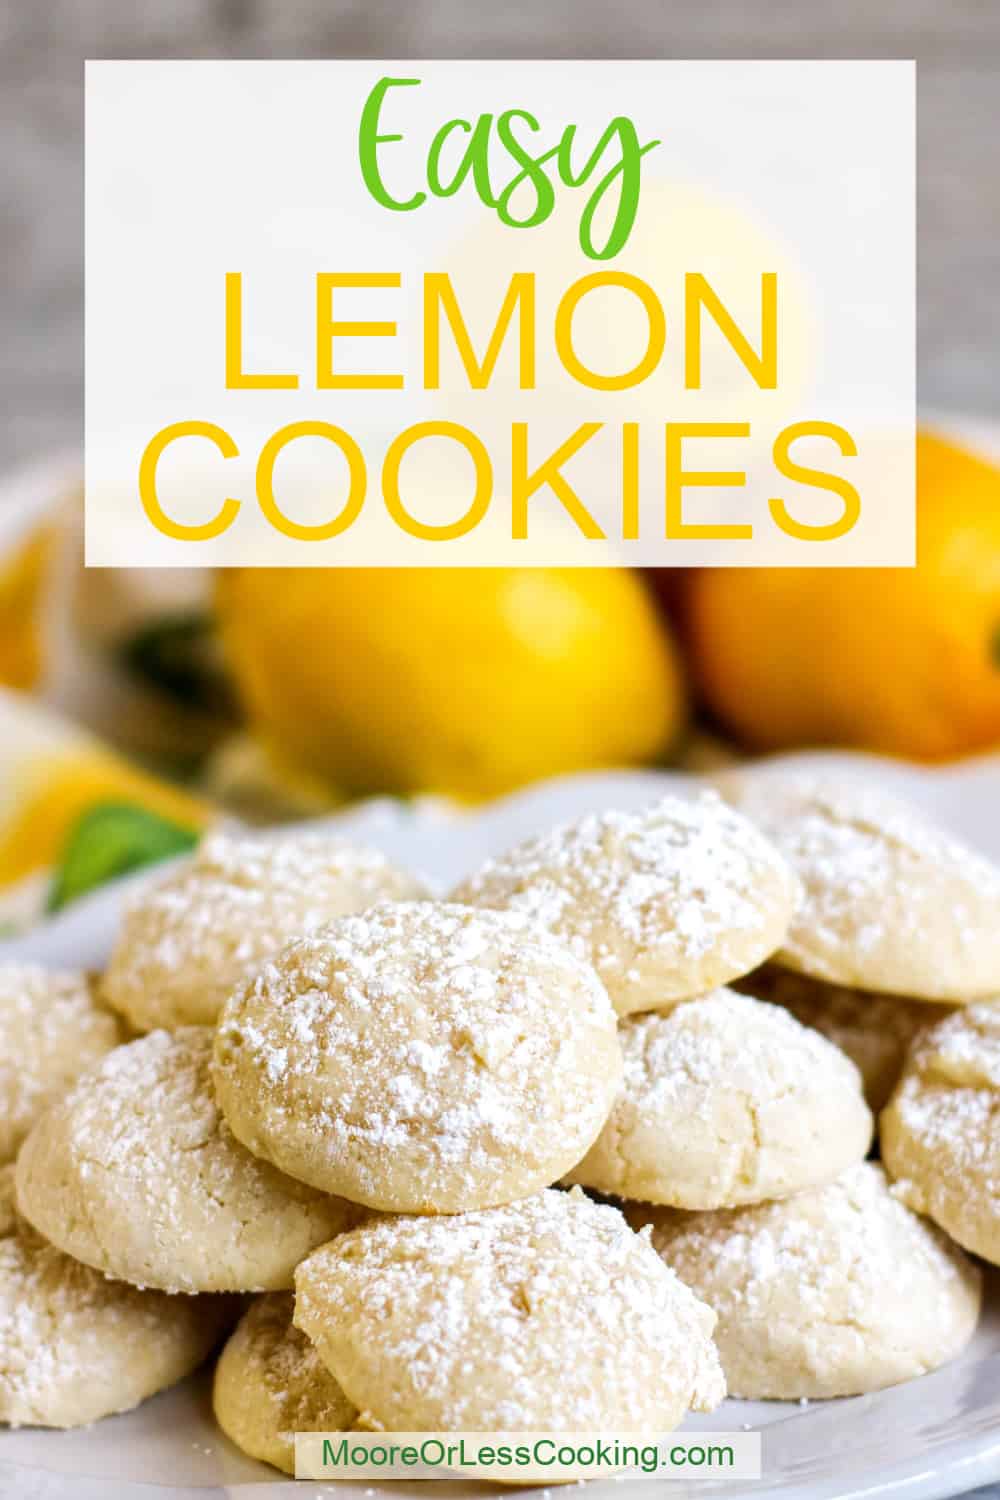 These buttery lemon cookies are a scrumptious way to enjoy the sunny flavor of citrus. The cookie batter is infused with lemon juice as well as lemon zest for a zingy touch that’s refreshing and delicious! via @Mooreorlesscook